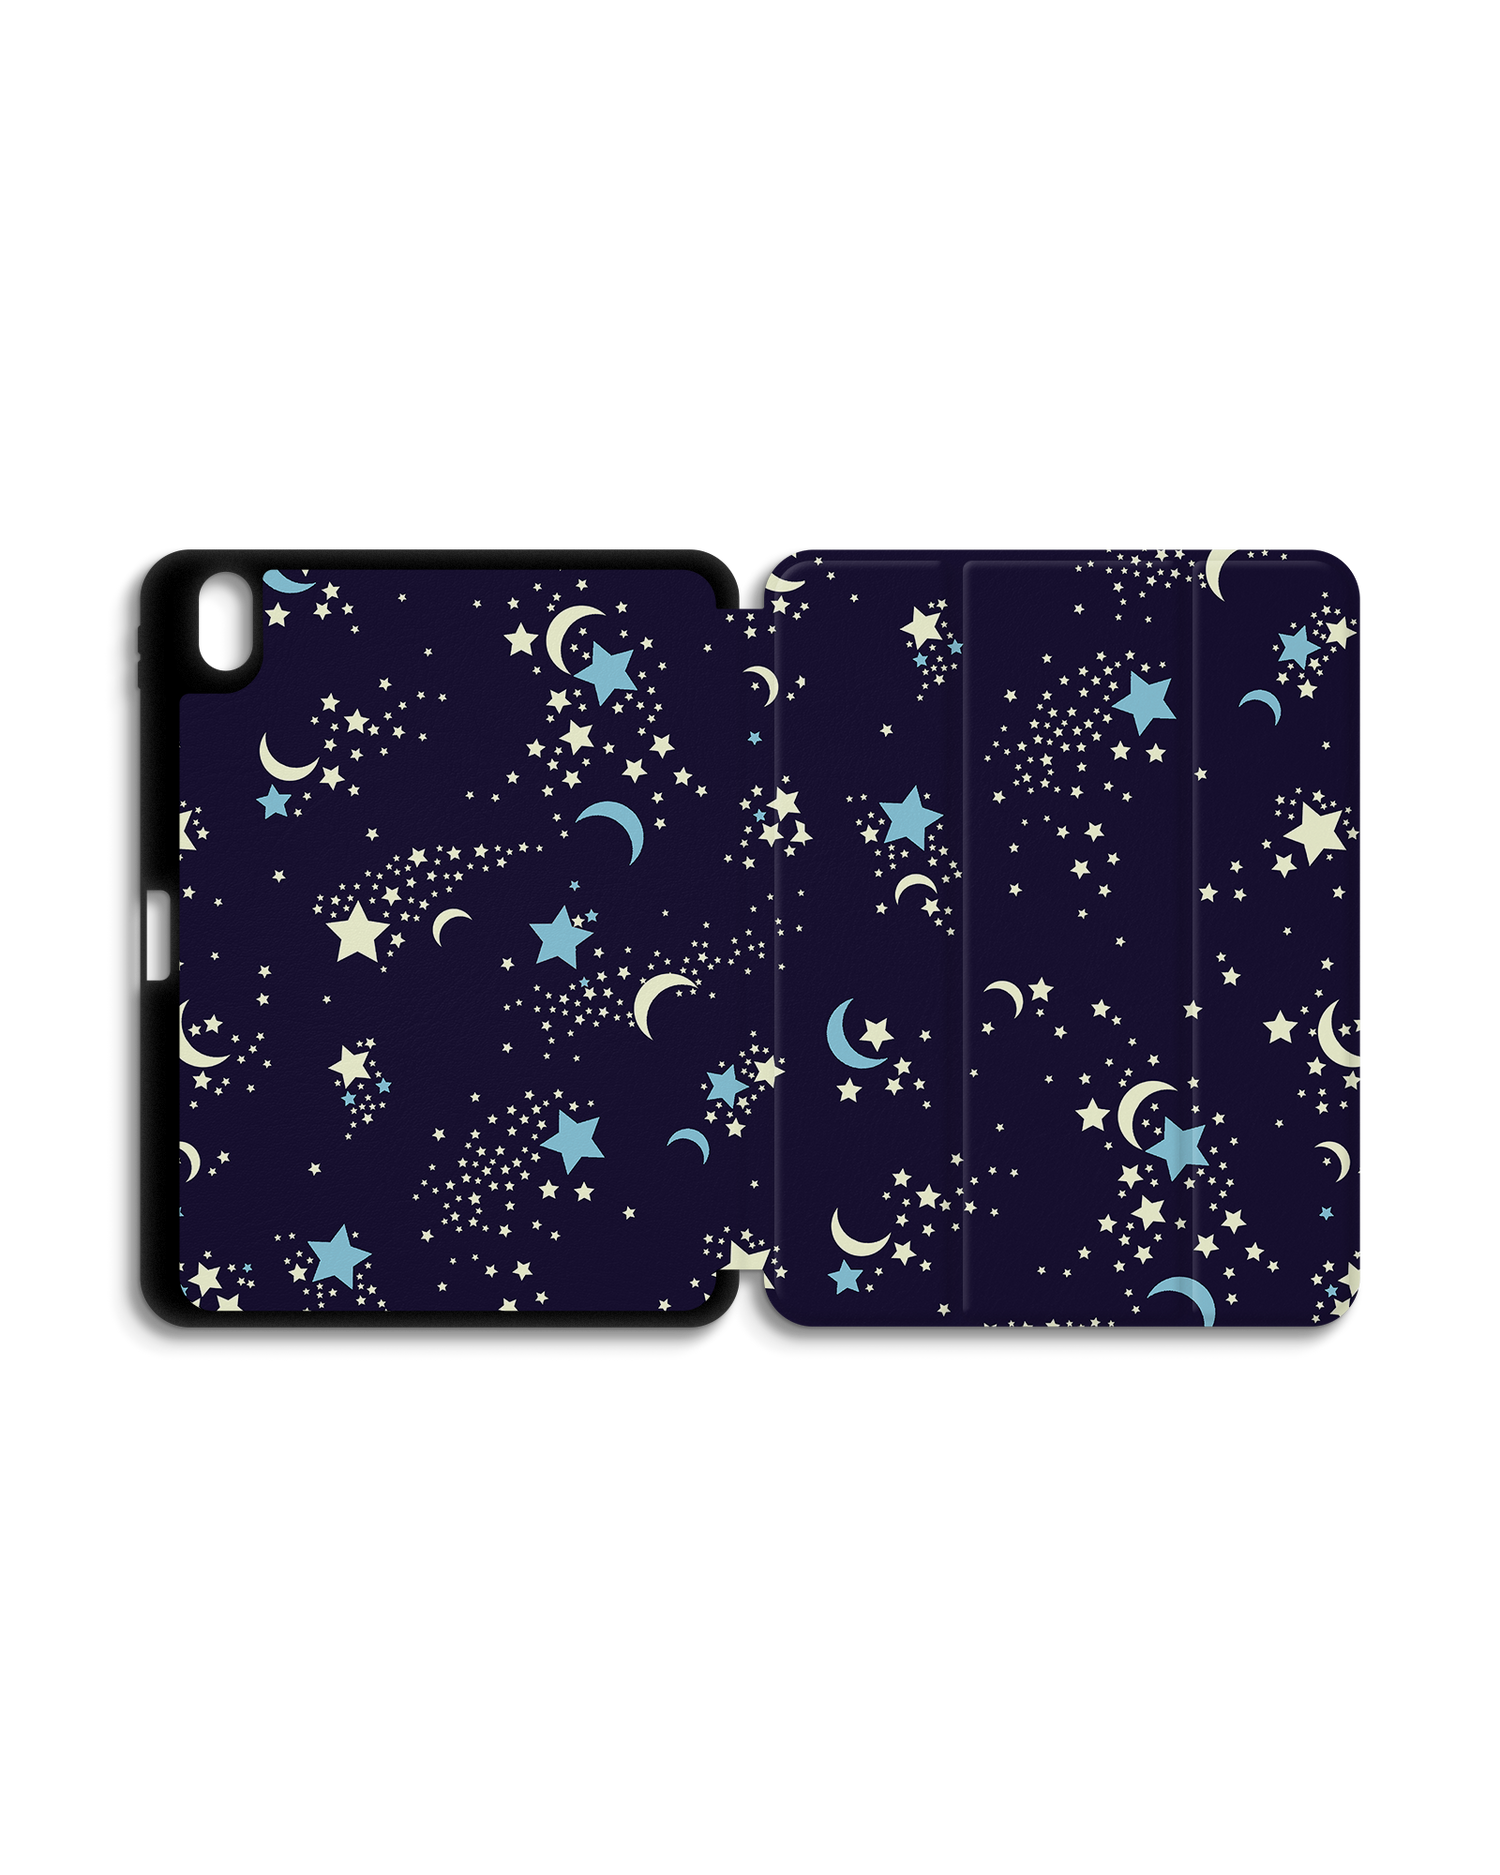 Mystical Pattern iPad Case with Pencil Holder for Apple iPad (10th Generation): Opened exterior view